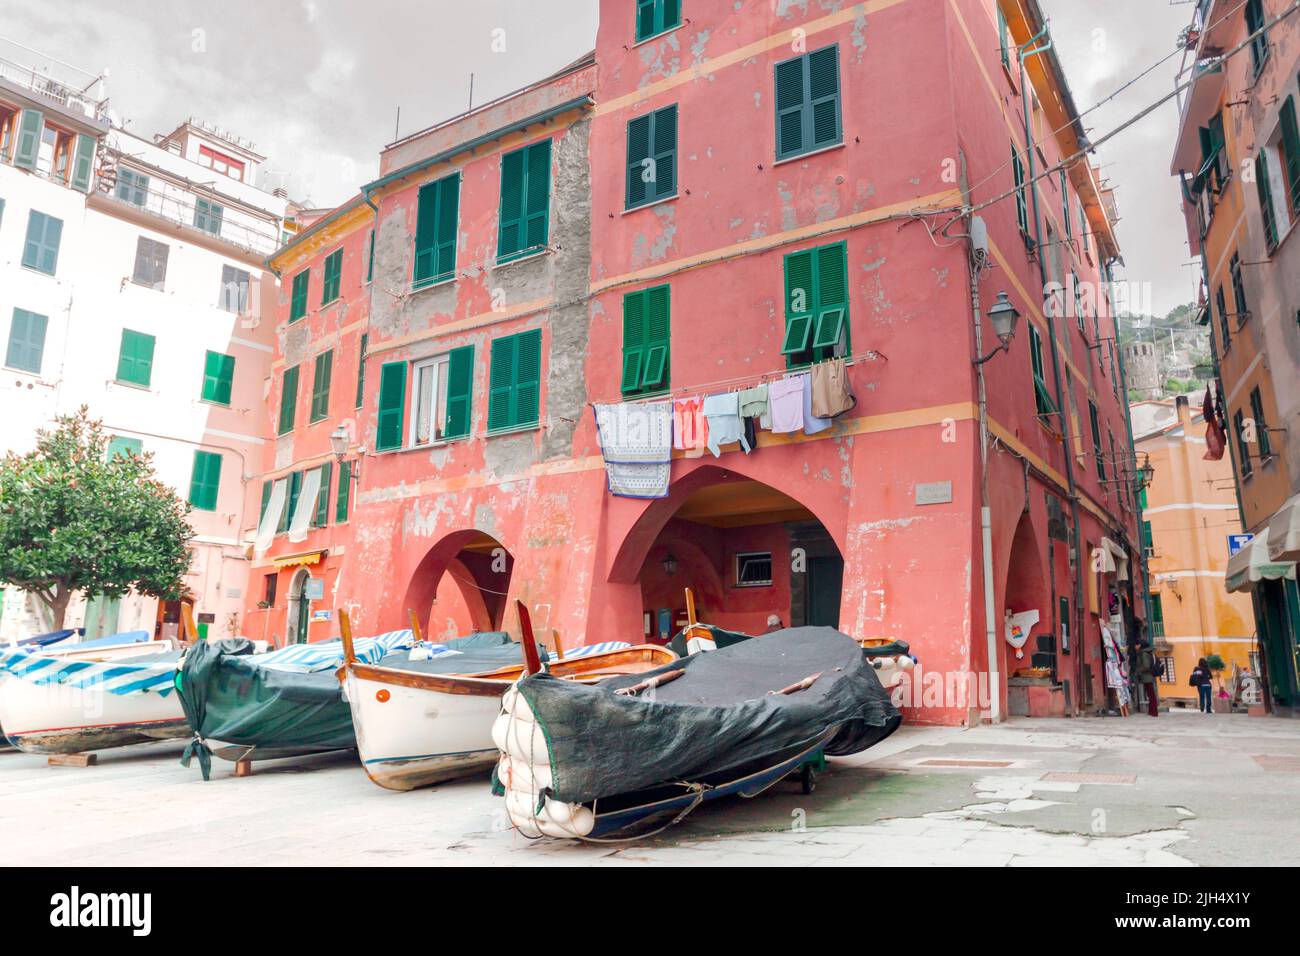 Characteristic houses and boats on ligurian coast named five lands in winter time. Vernazza, Liguria. Italy Stock Photo